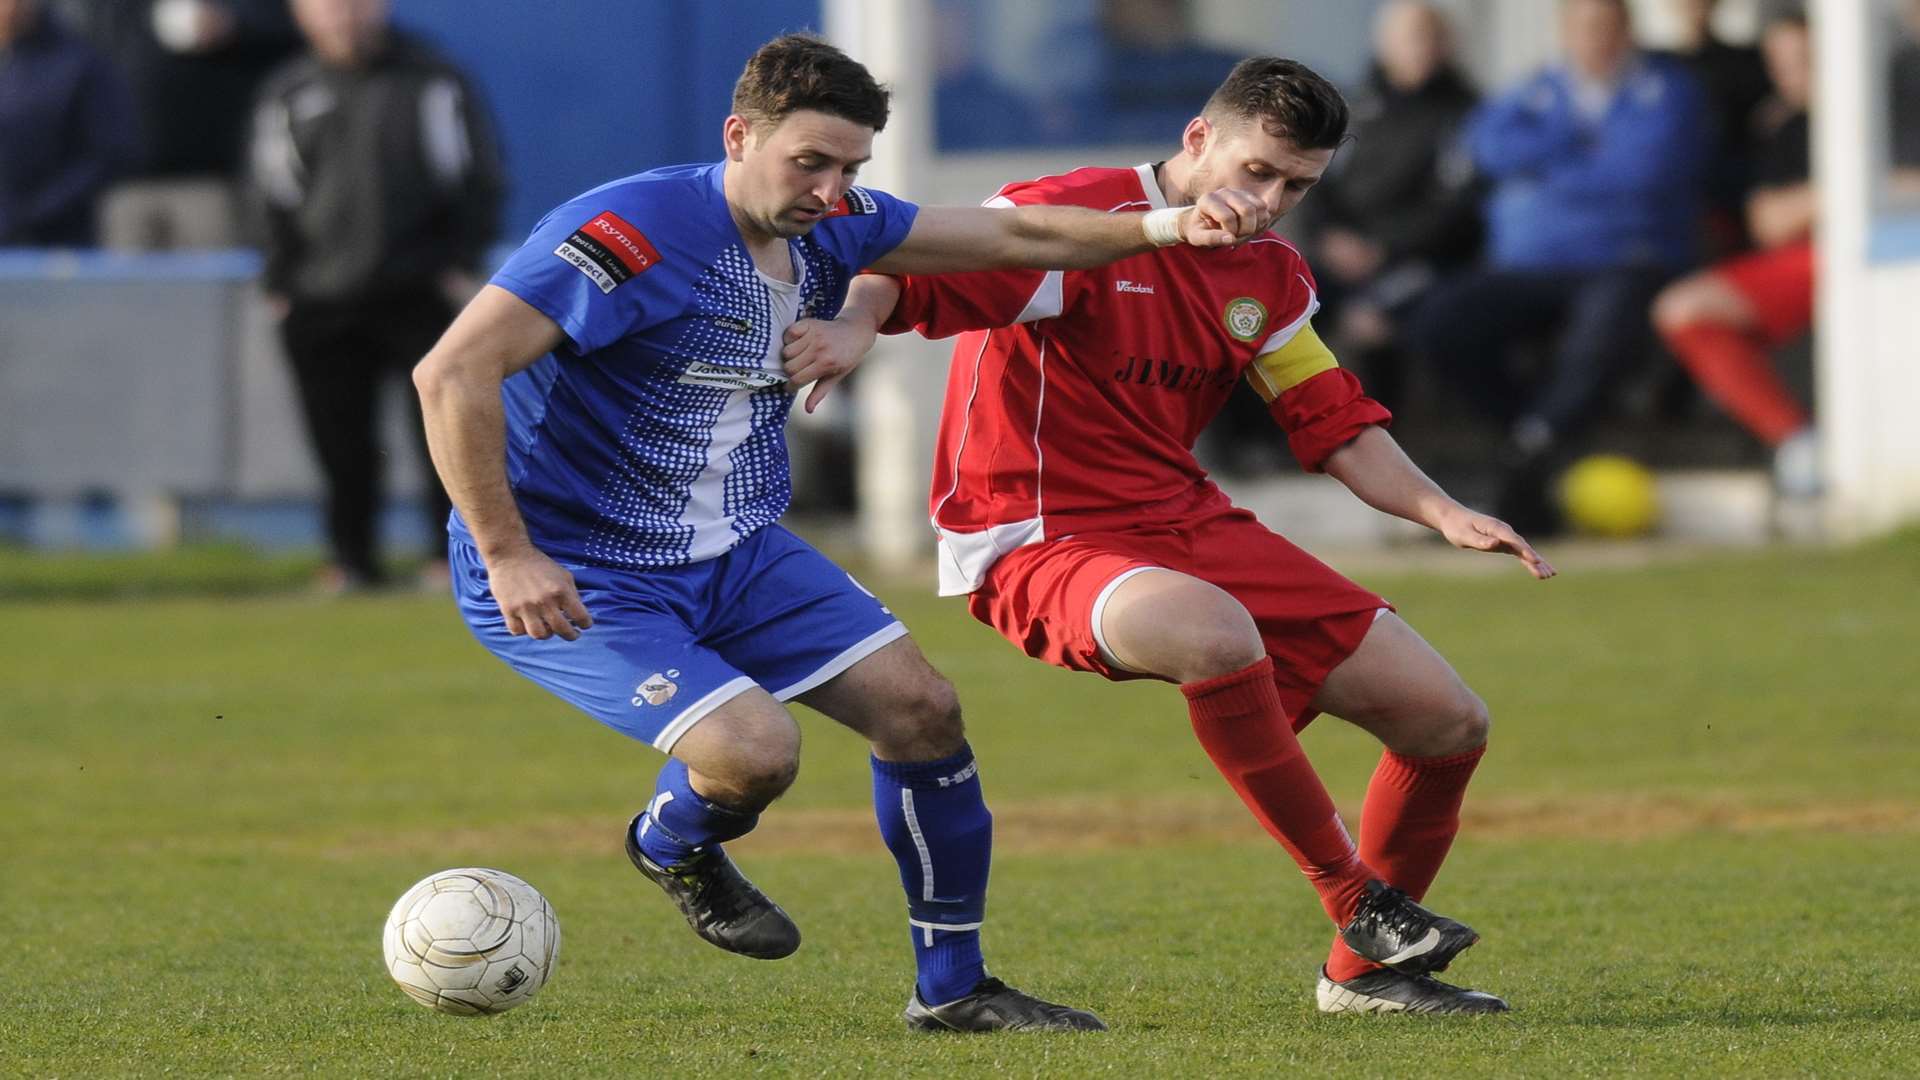 King playing for Herne Bay